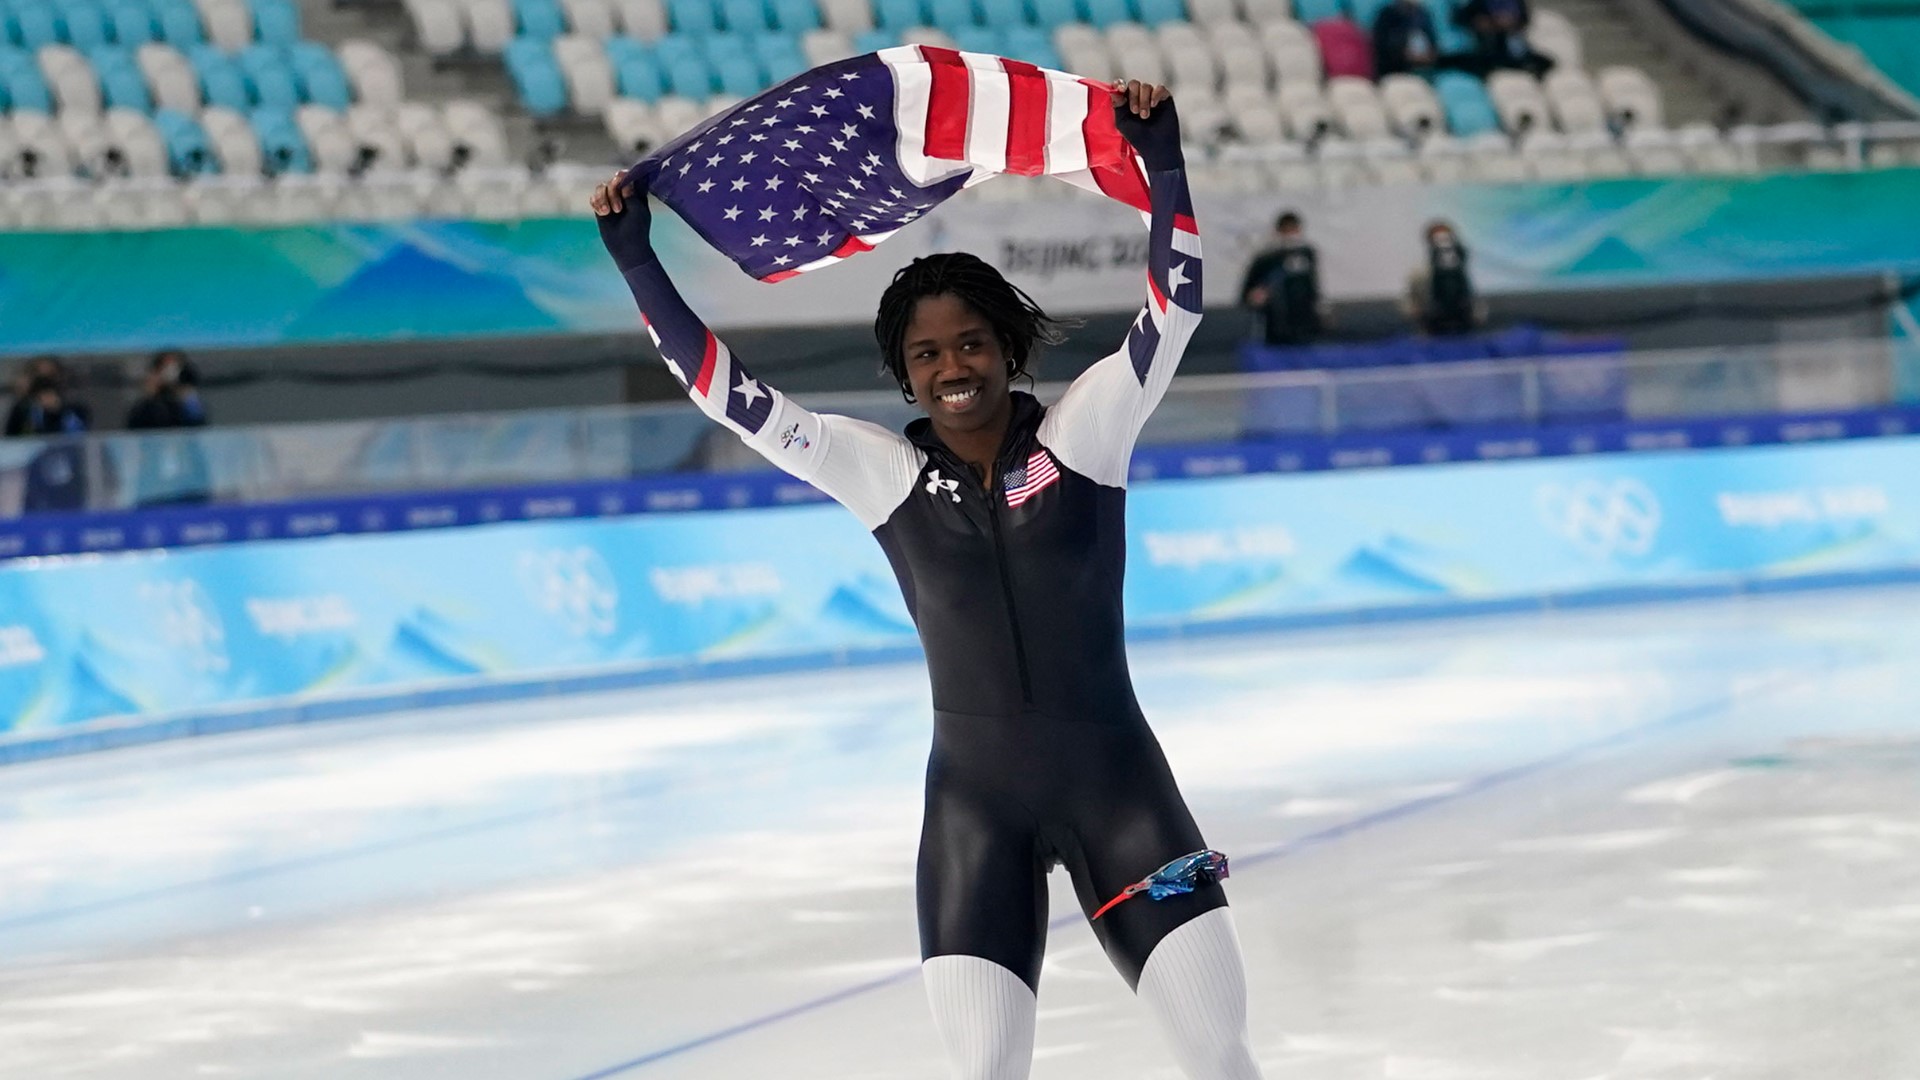 Erin Jackson has become the first Black woman to win a speedskating medal at the Winter Olympics. And a gold one, at that.